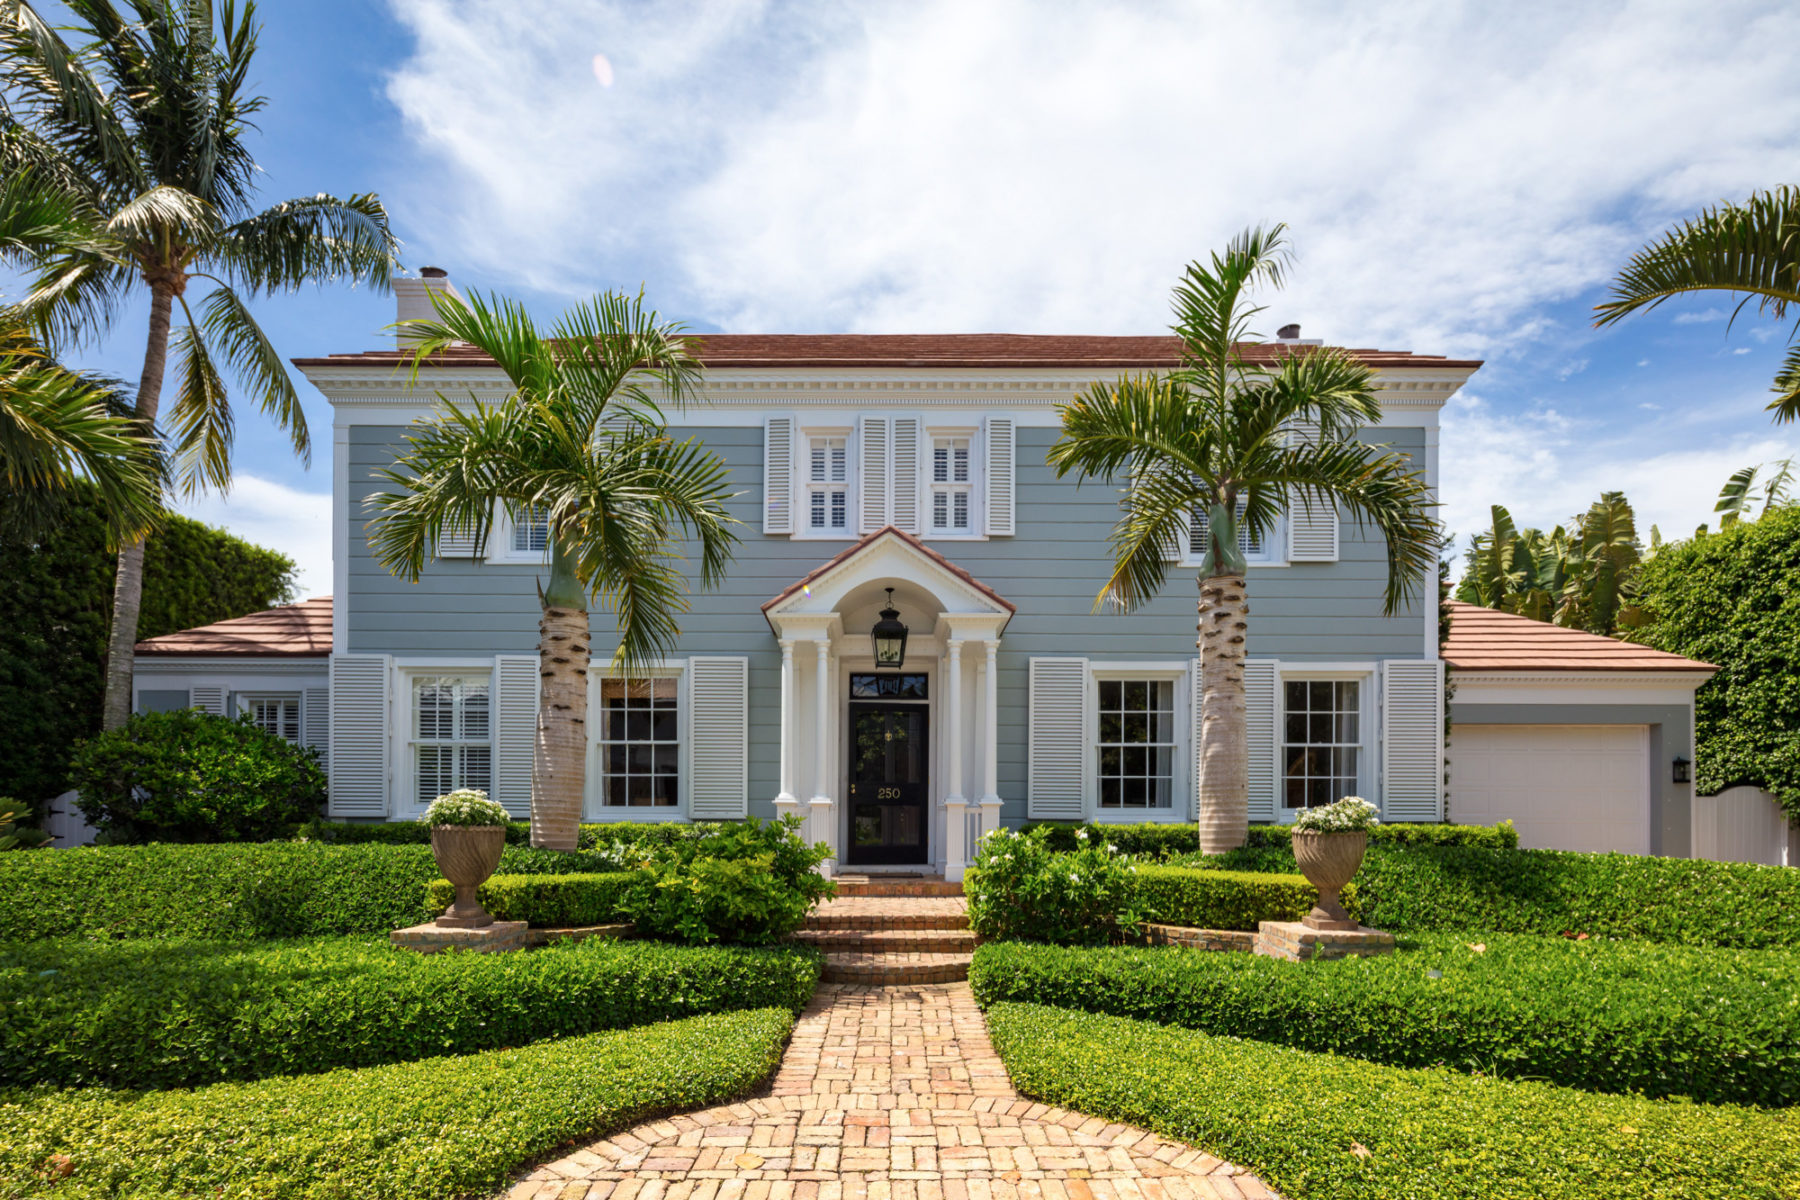 image of Coastal Colonial front of two story home with palms